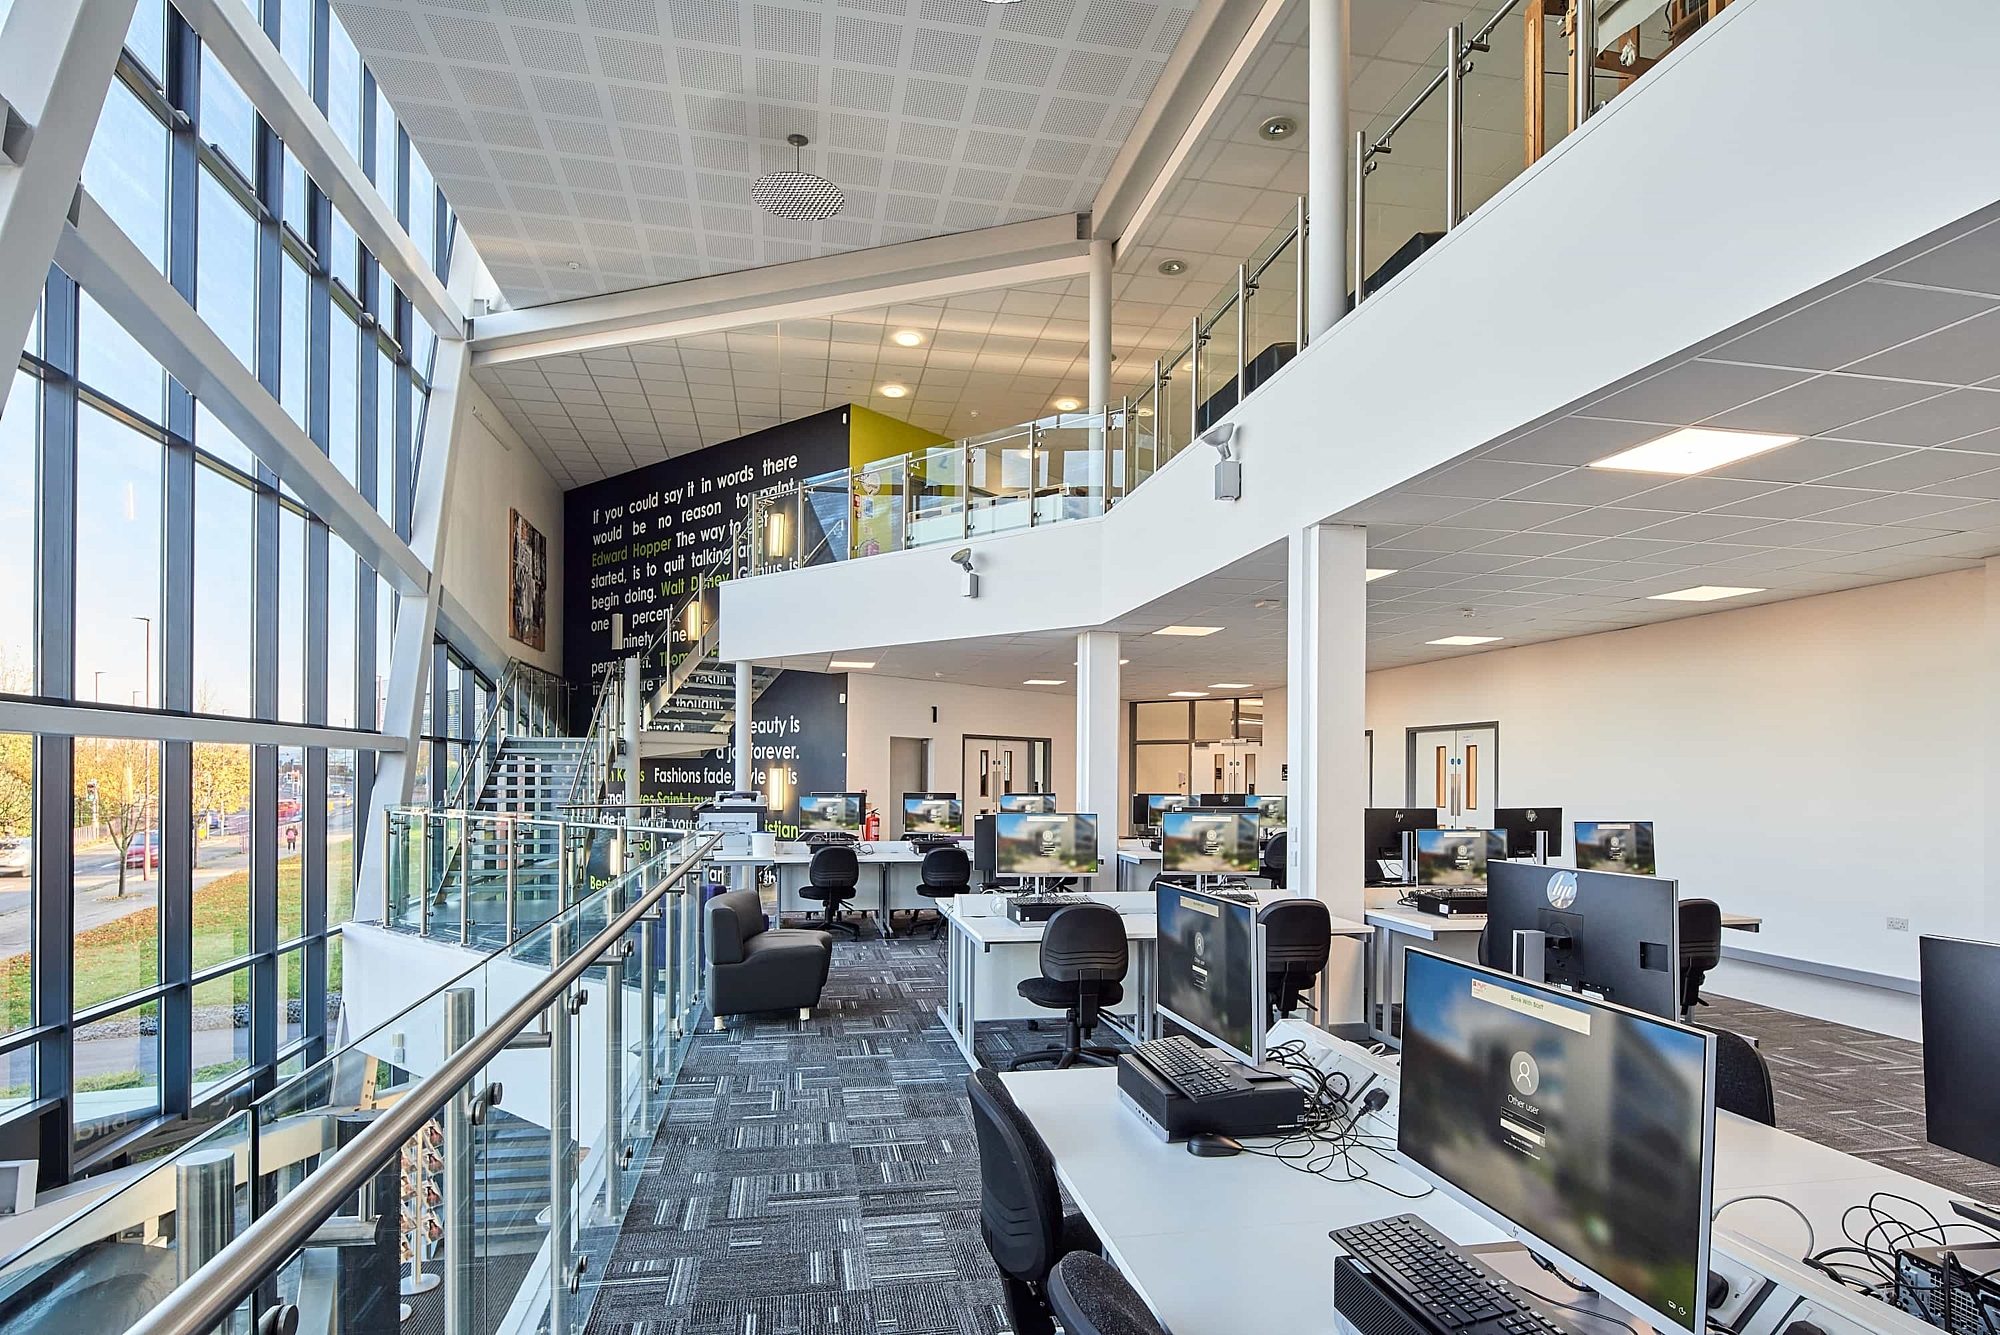 Dudley College learning space